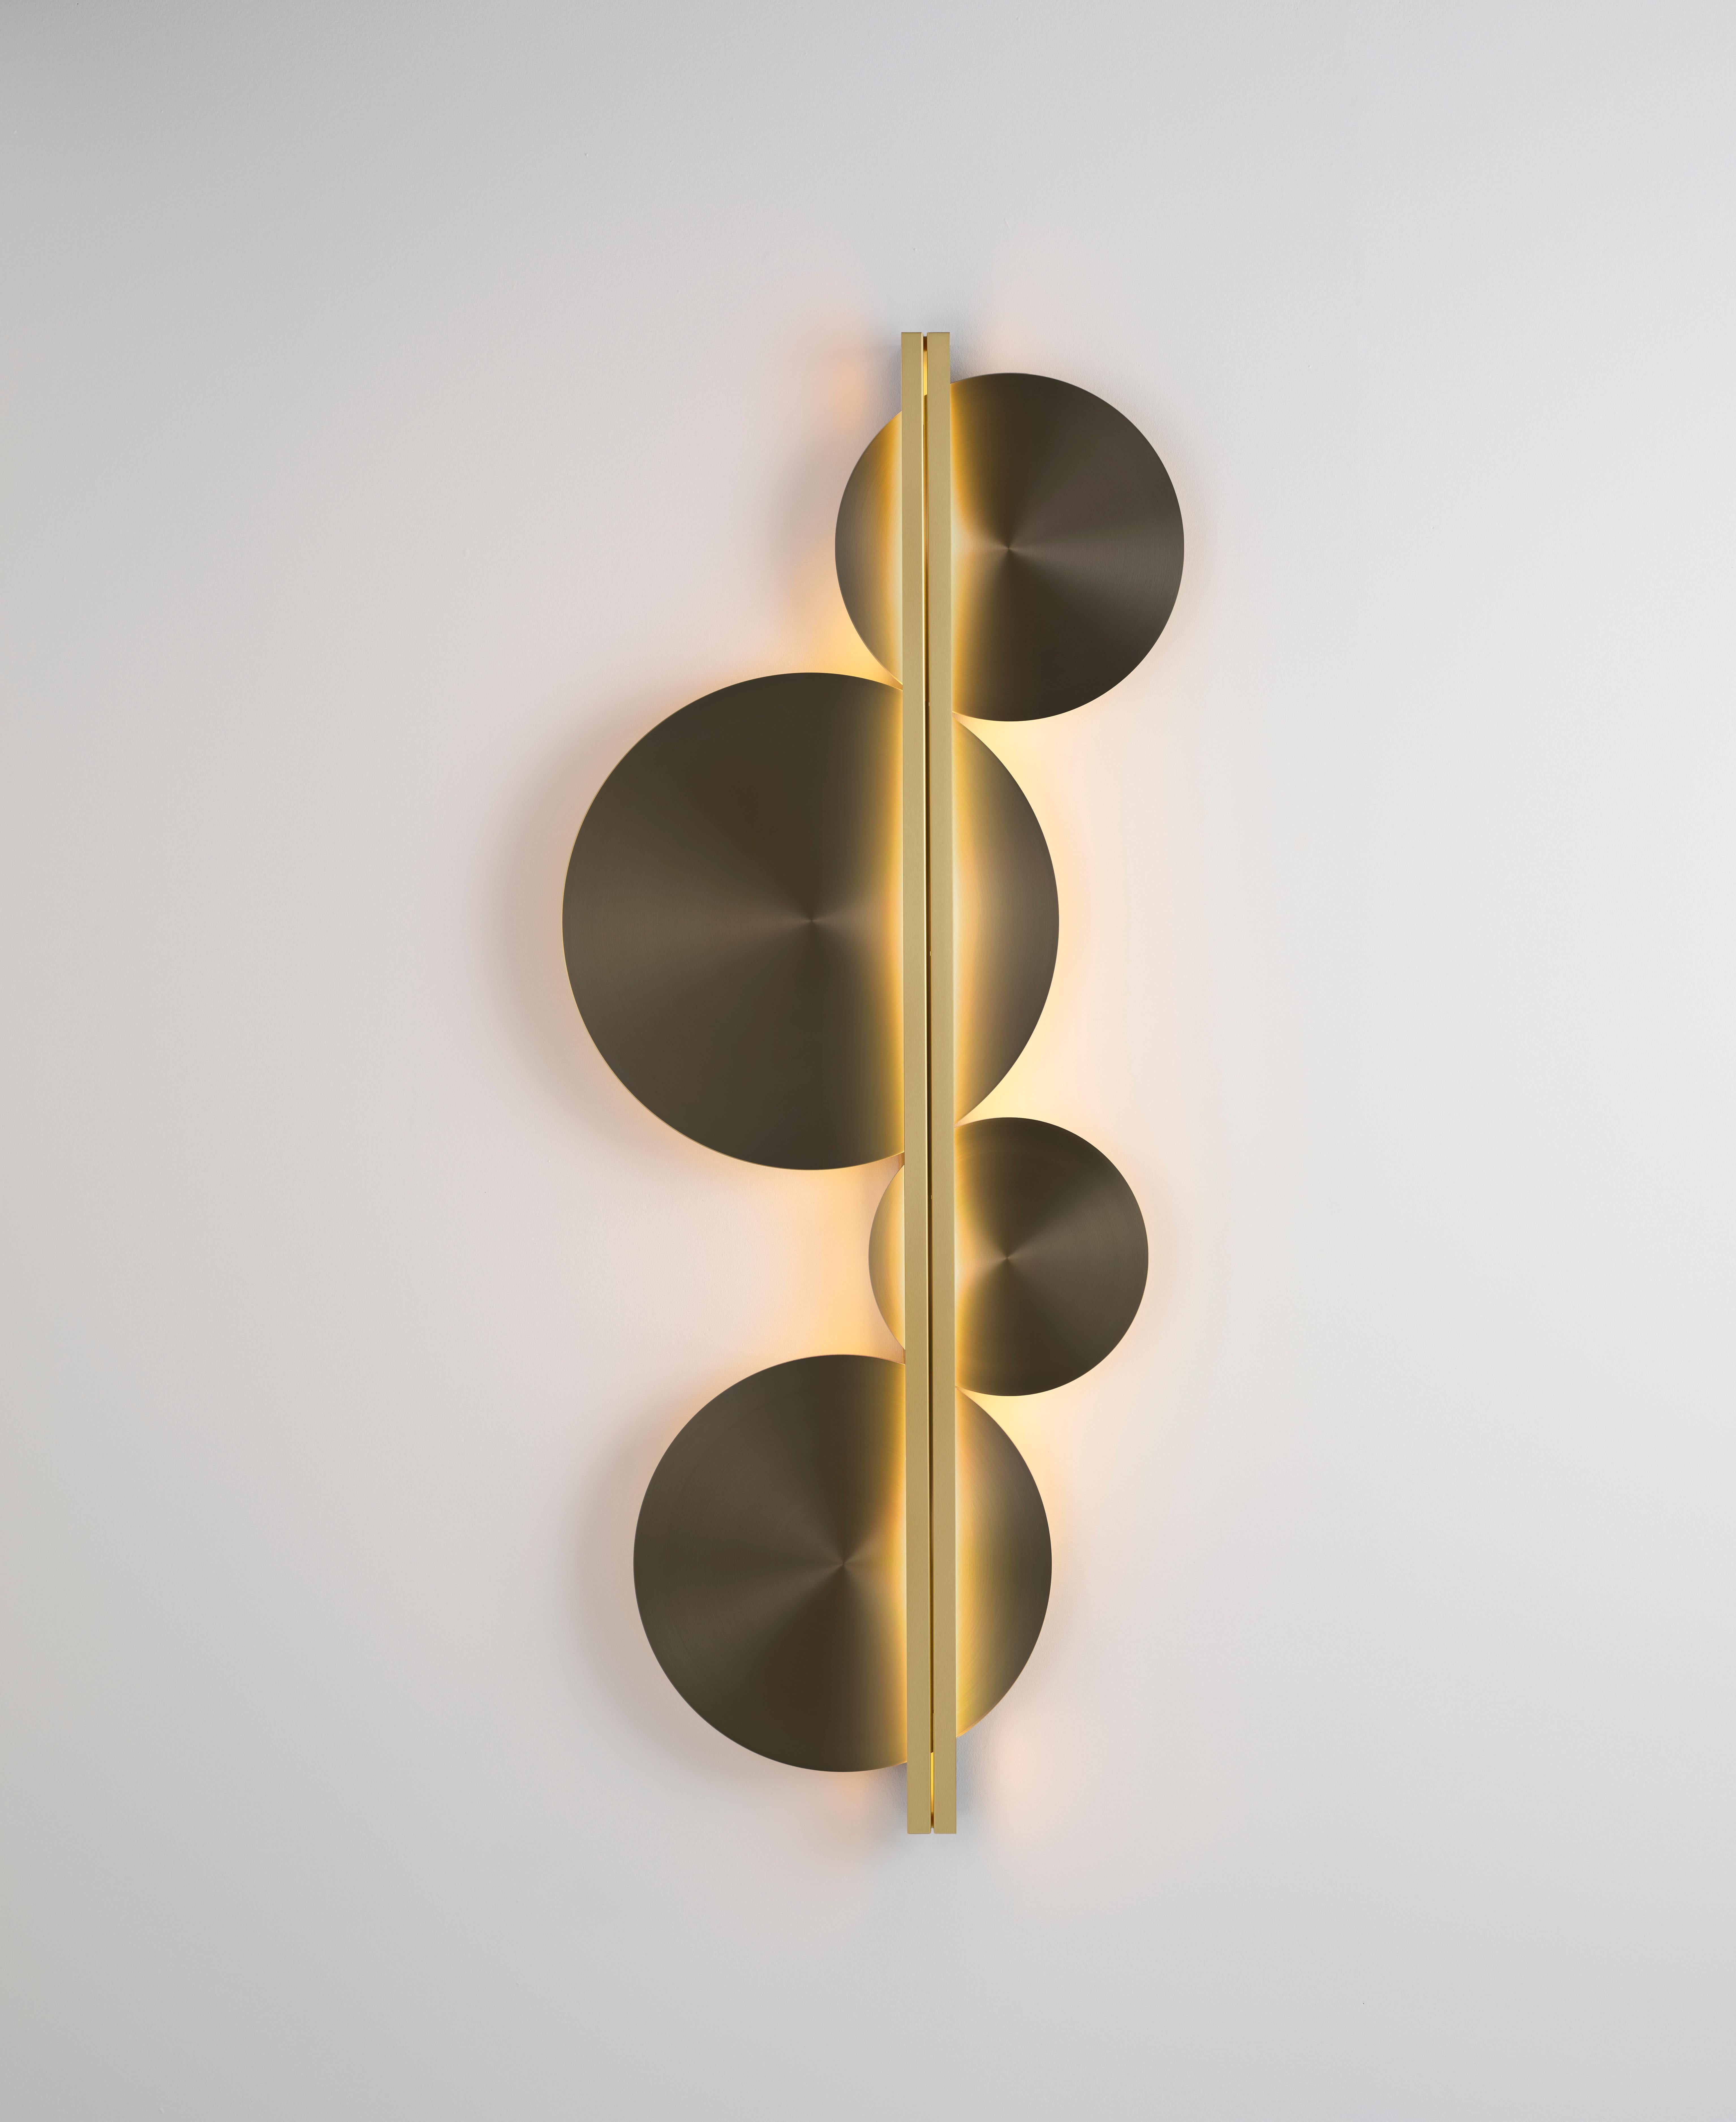 Strate Moon Wall Light by Emilie Cathelineau
Dimensions: W 62.9 x D 8.7 x H 150 cm
Materials: Solid brass, Polycarbonate diffuser.
Others finishes and dimensions are available.

All our lamps can be wired according to each country. If sold to